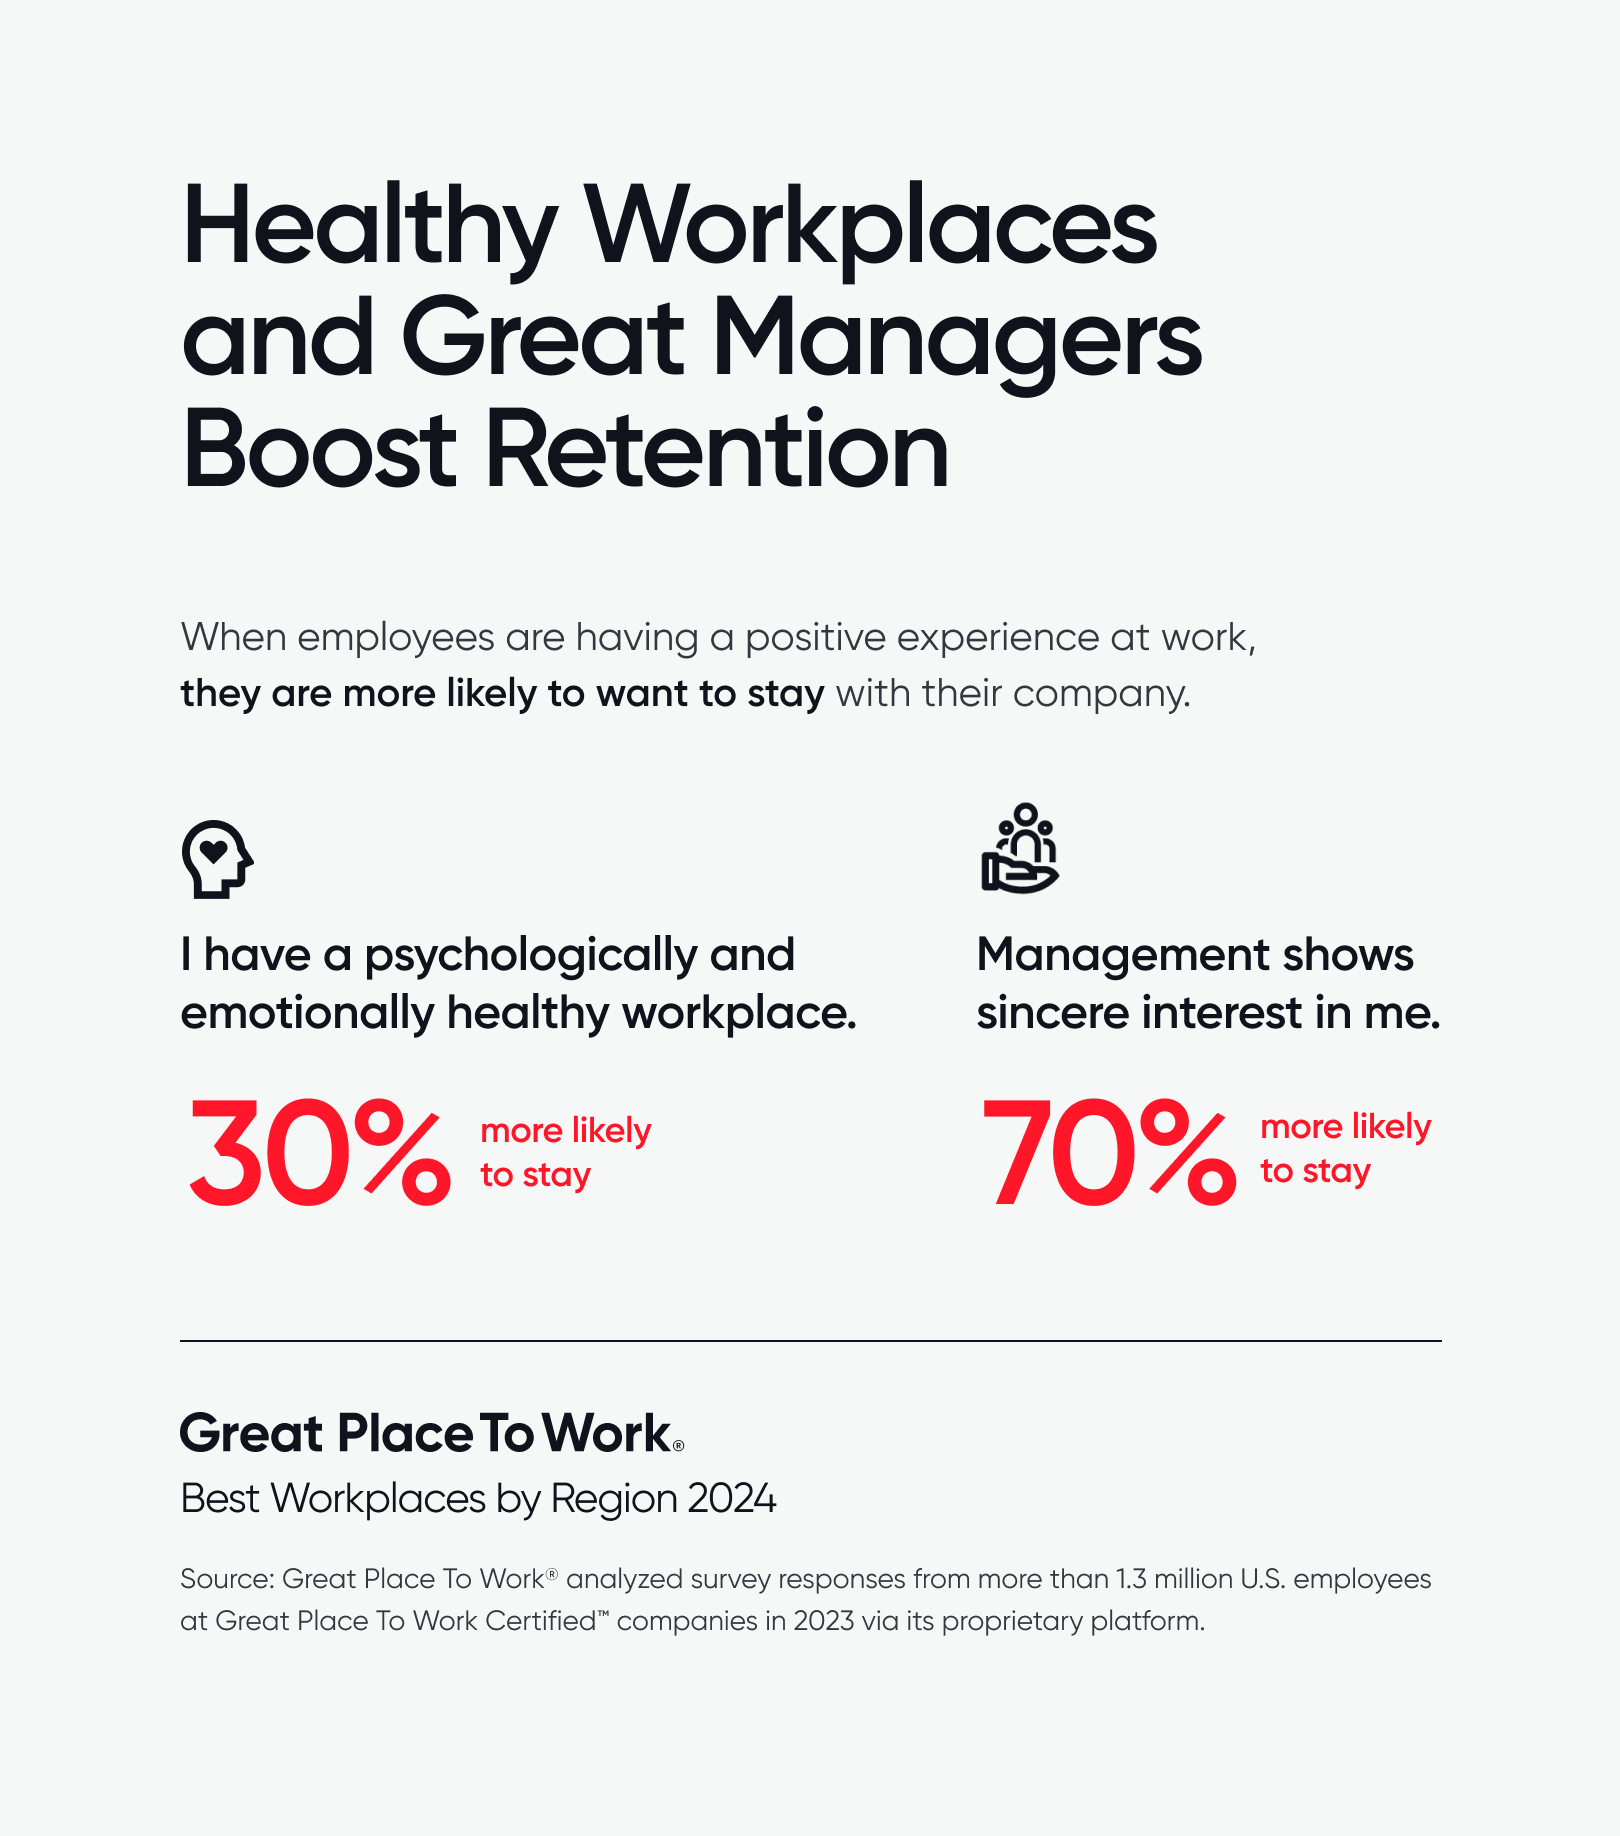 Healthy Workplaces and Great Managers Boost Retention Bar Chart